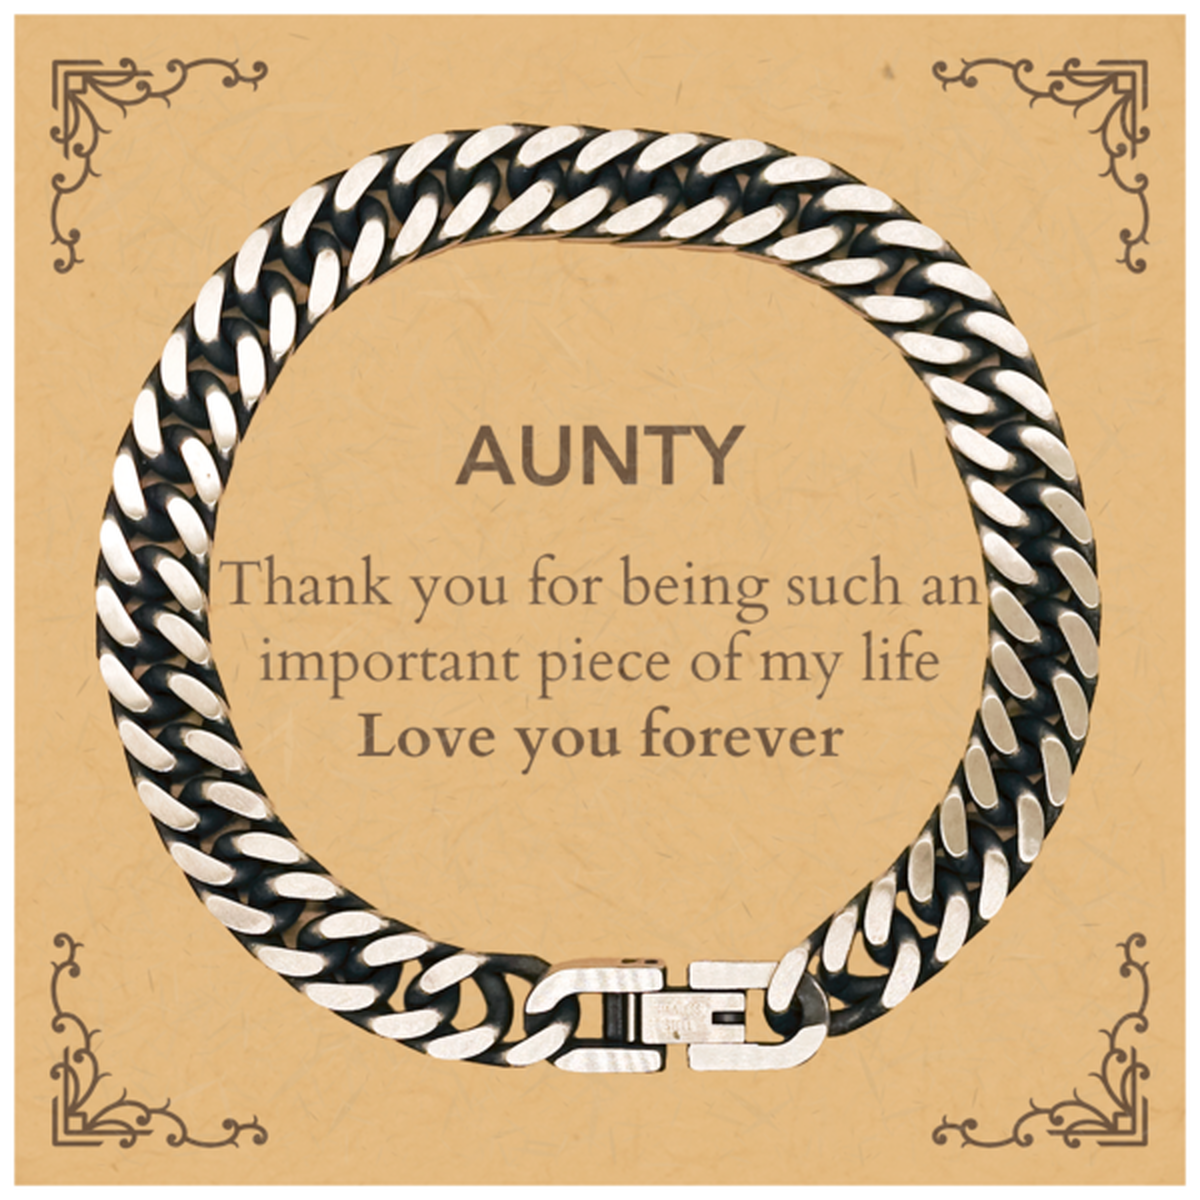 Appropriate Aunty Cuban Link Chain Bracelet Epic Birthday Gifts for Aunty Thank you for being such an important piece of my life Aunty Christmas Mothers Fathers Day